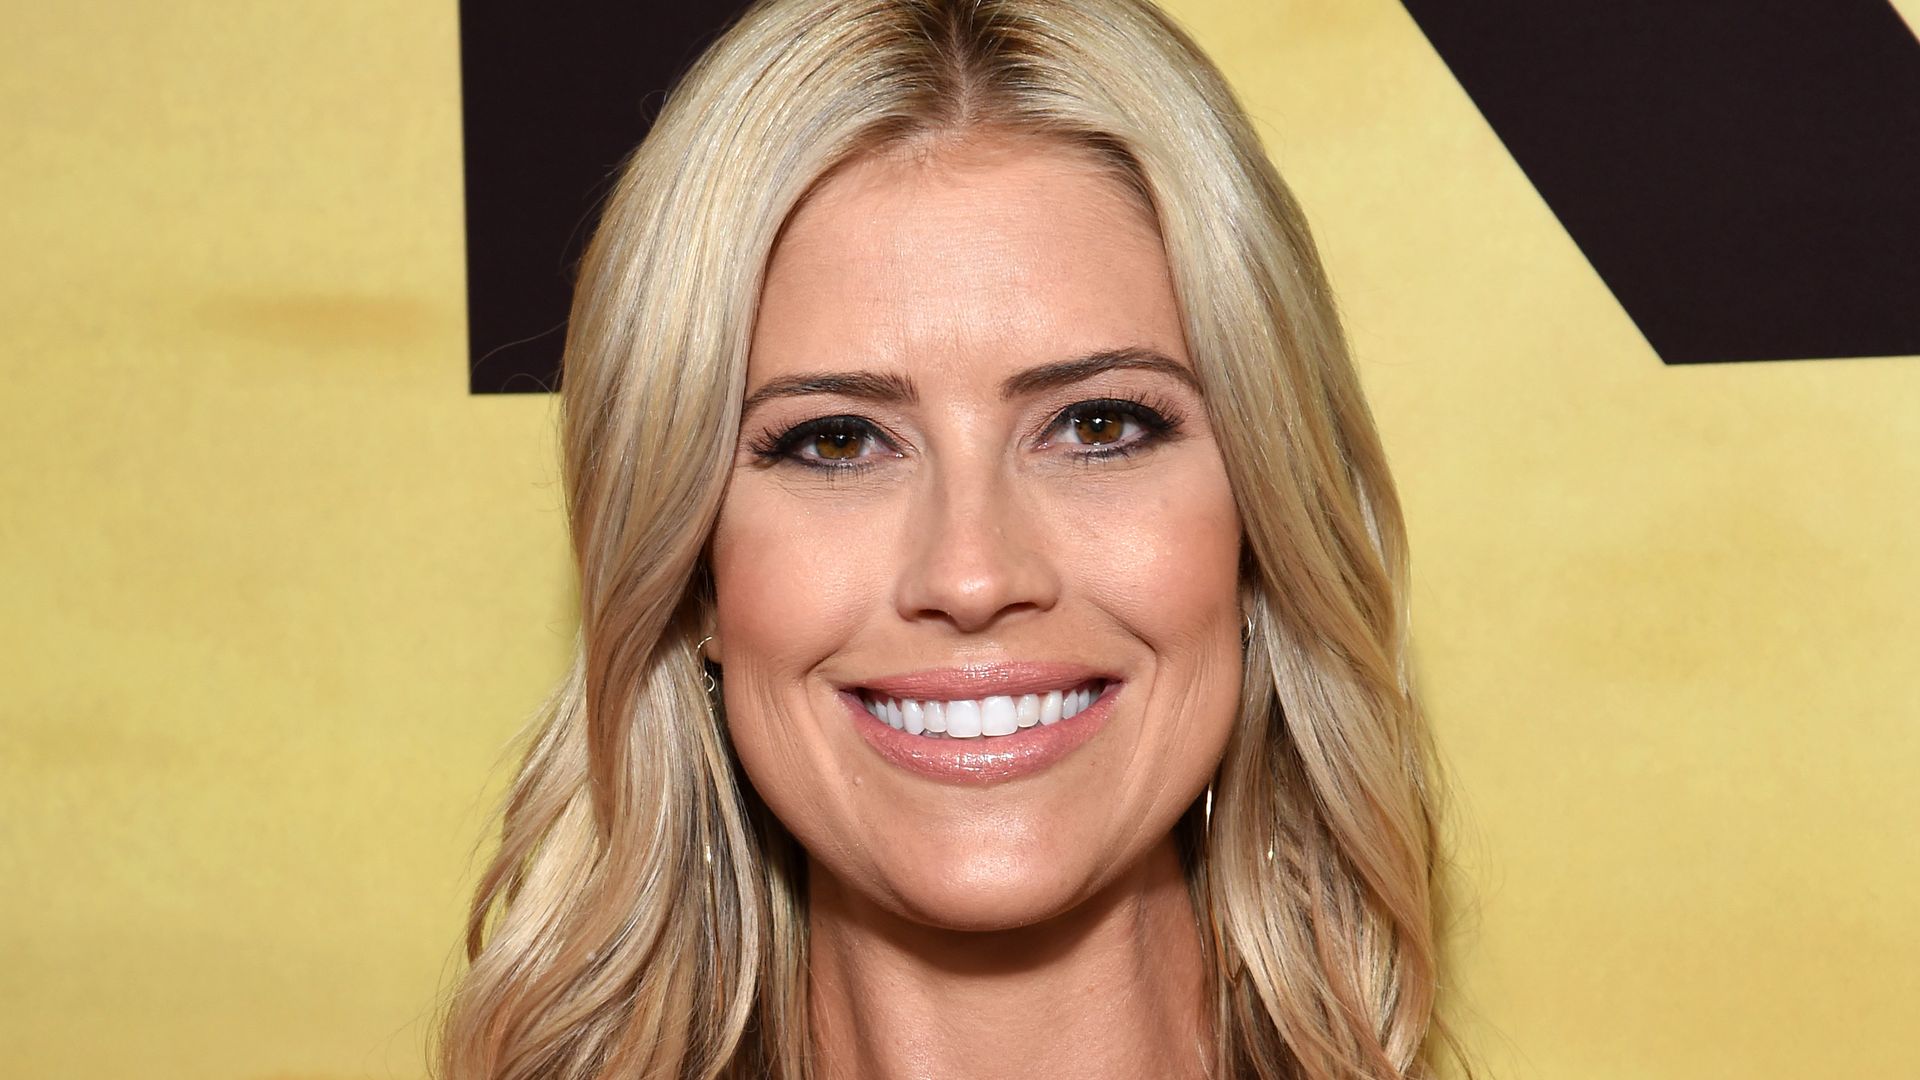 Christina Anstead attends Discovery's "Serengeti" premiere at Wallis Annenberg Center for the Performing Arts on July 23, 2019 in Beverly Hills, California. (Photo by Michael Kovac/Getty Images for Discovery Channel )